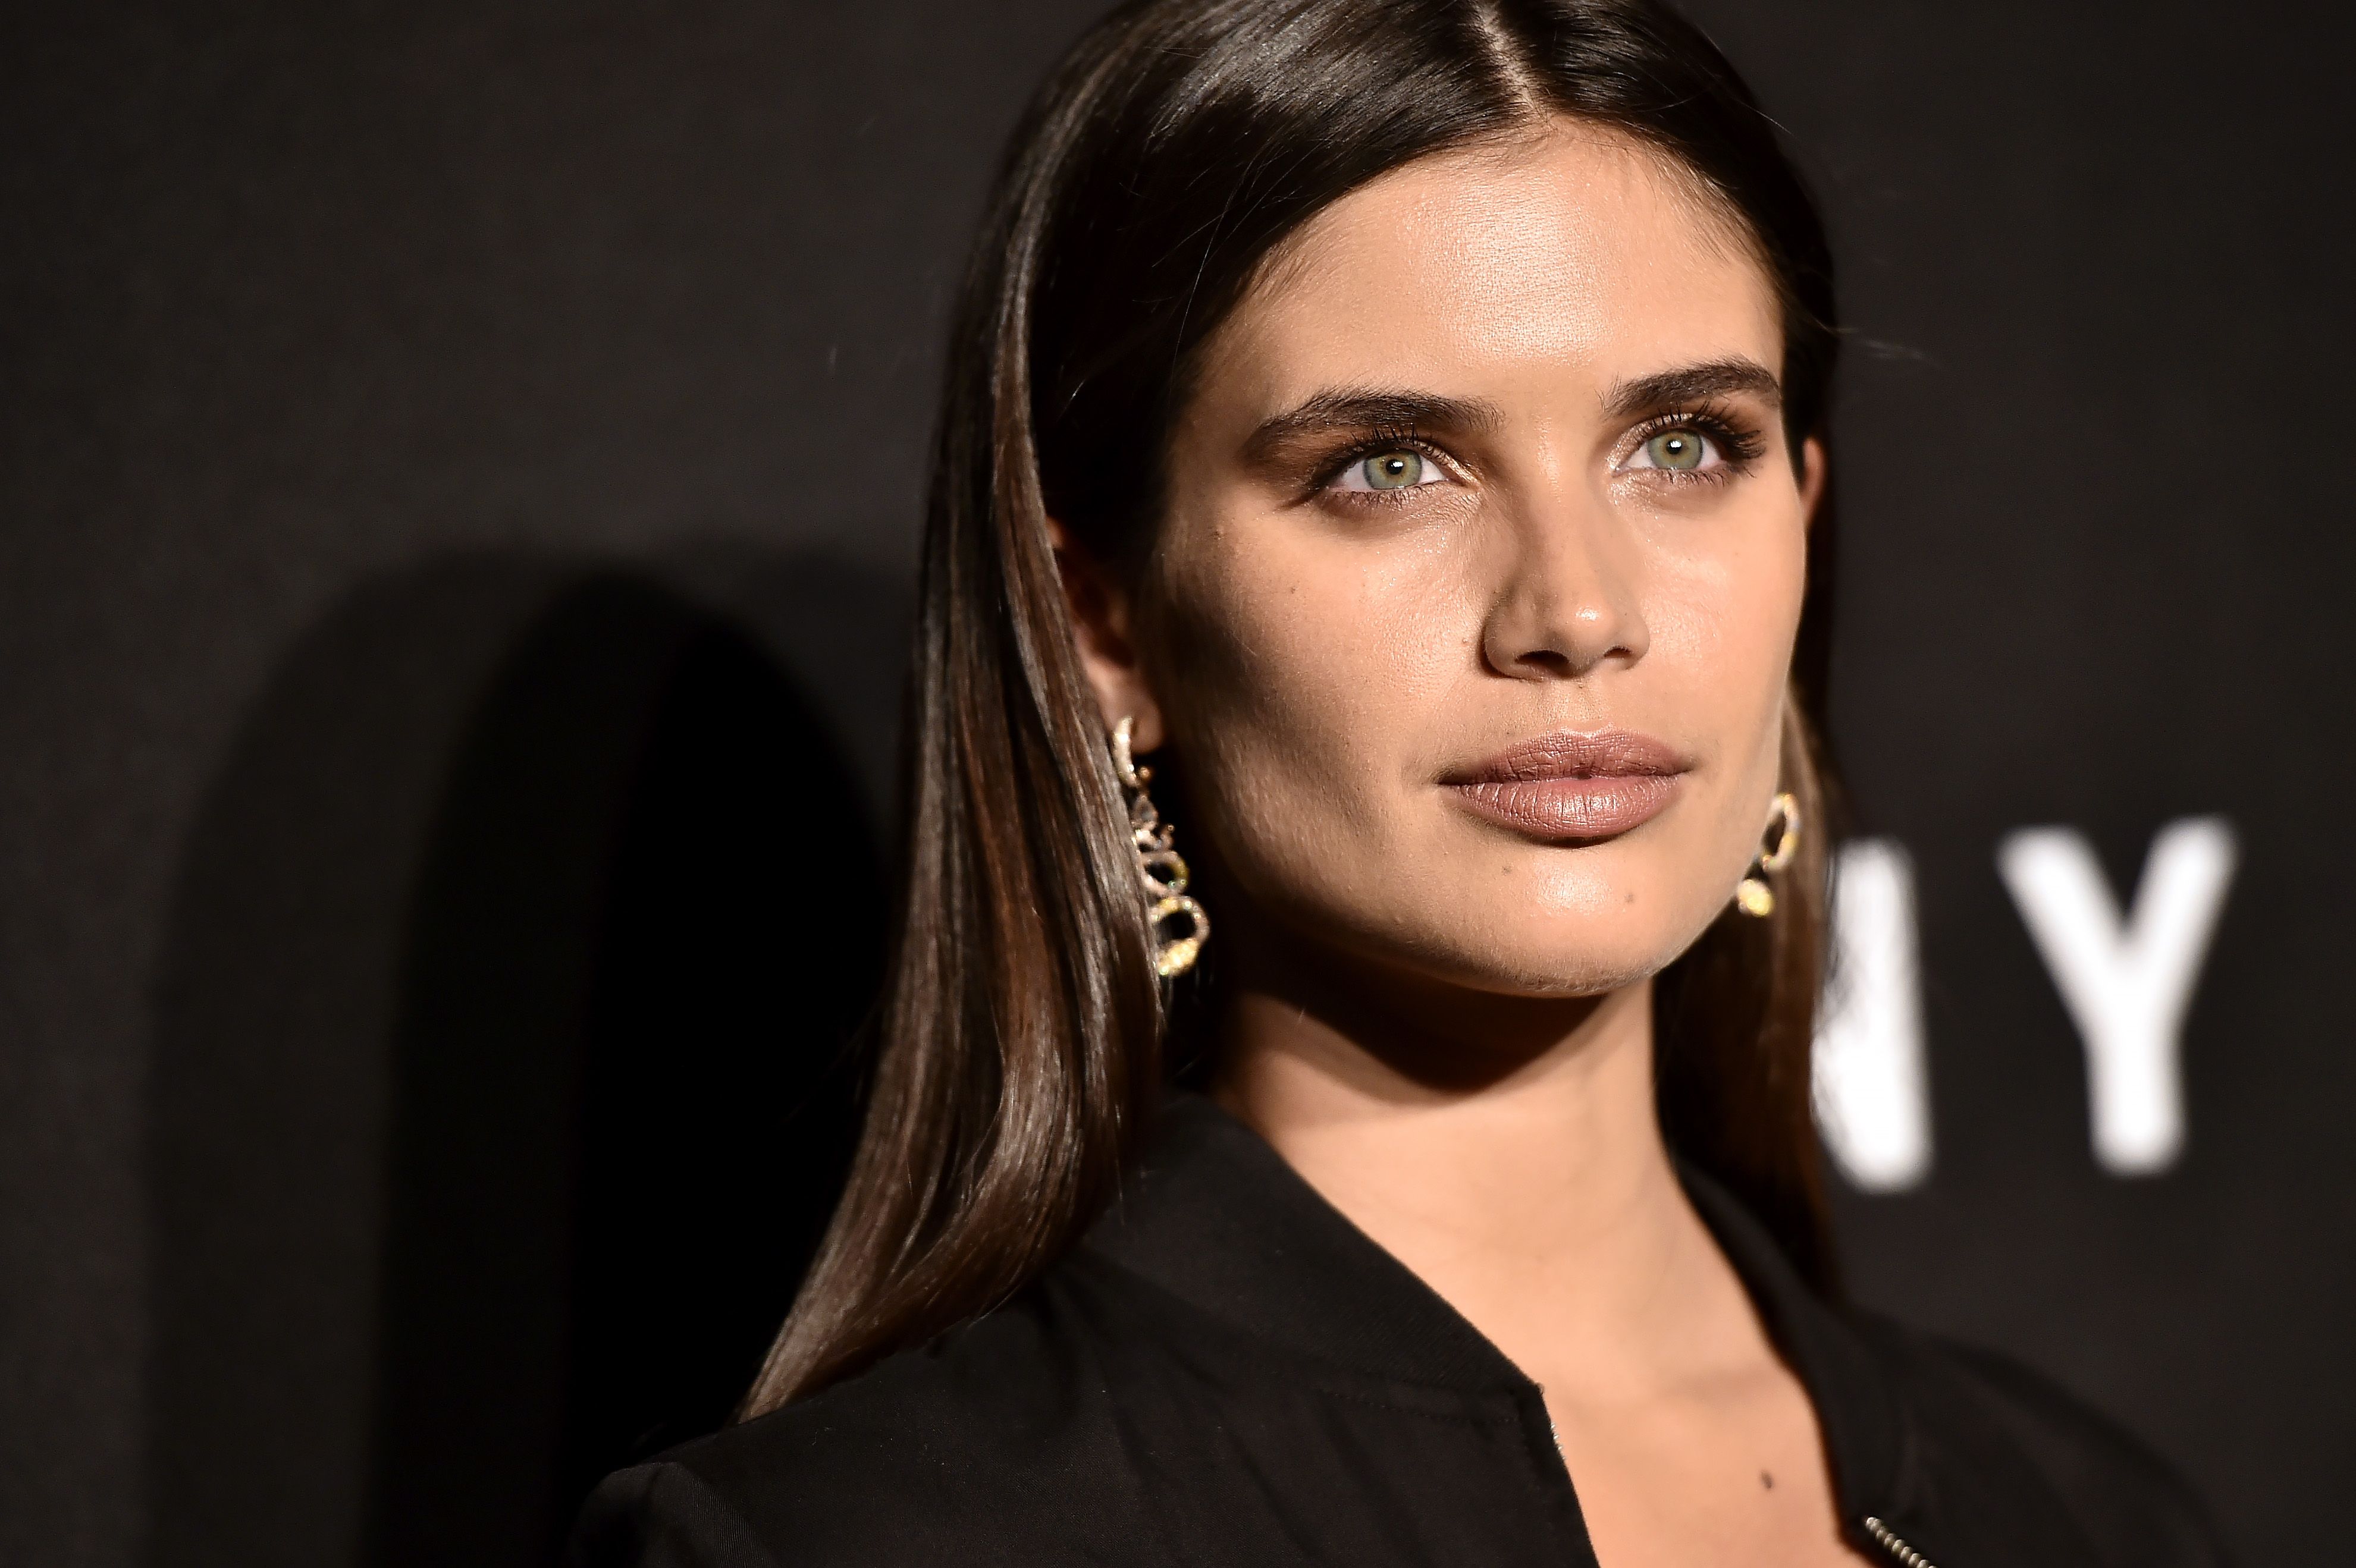 Sara Sampaio Opens Up About Her Trichotillomania Hair-Pulling